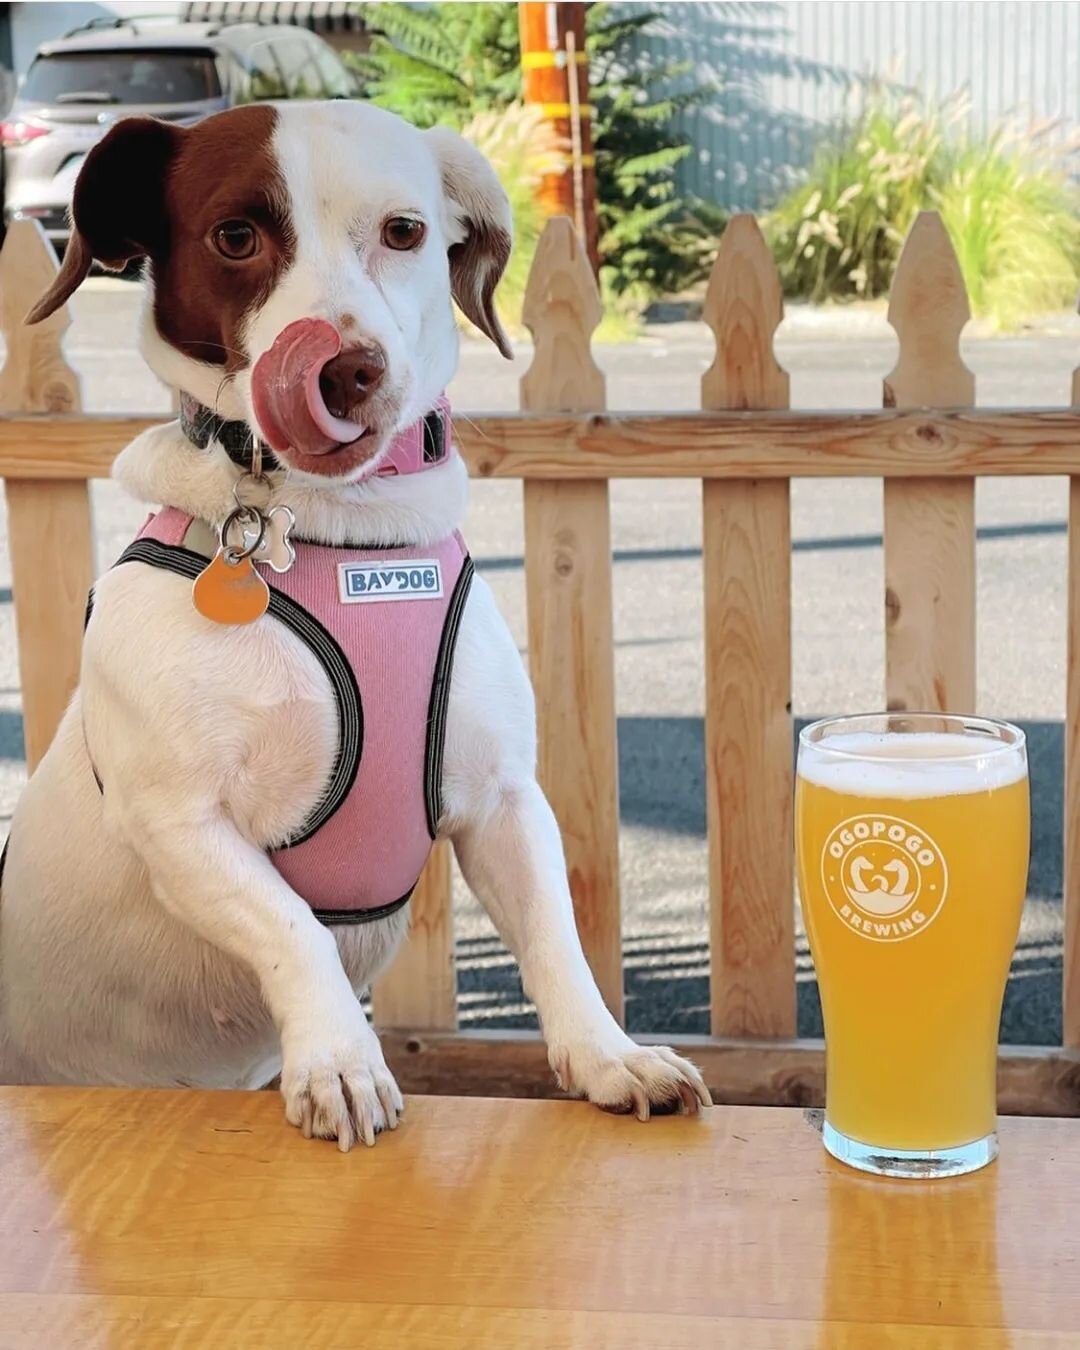 Check out the adorable Riley, guarding 'Peryton' for her bff.
&bull;
We're open until 10pm today, with trivia from 7-9
&bull;
Thanks for sharing 📷:@brewswithbridget